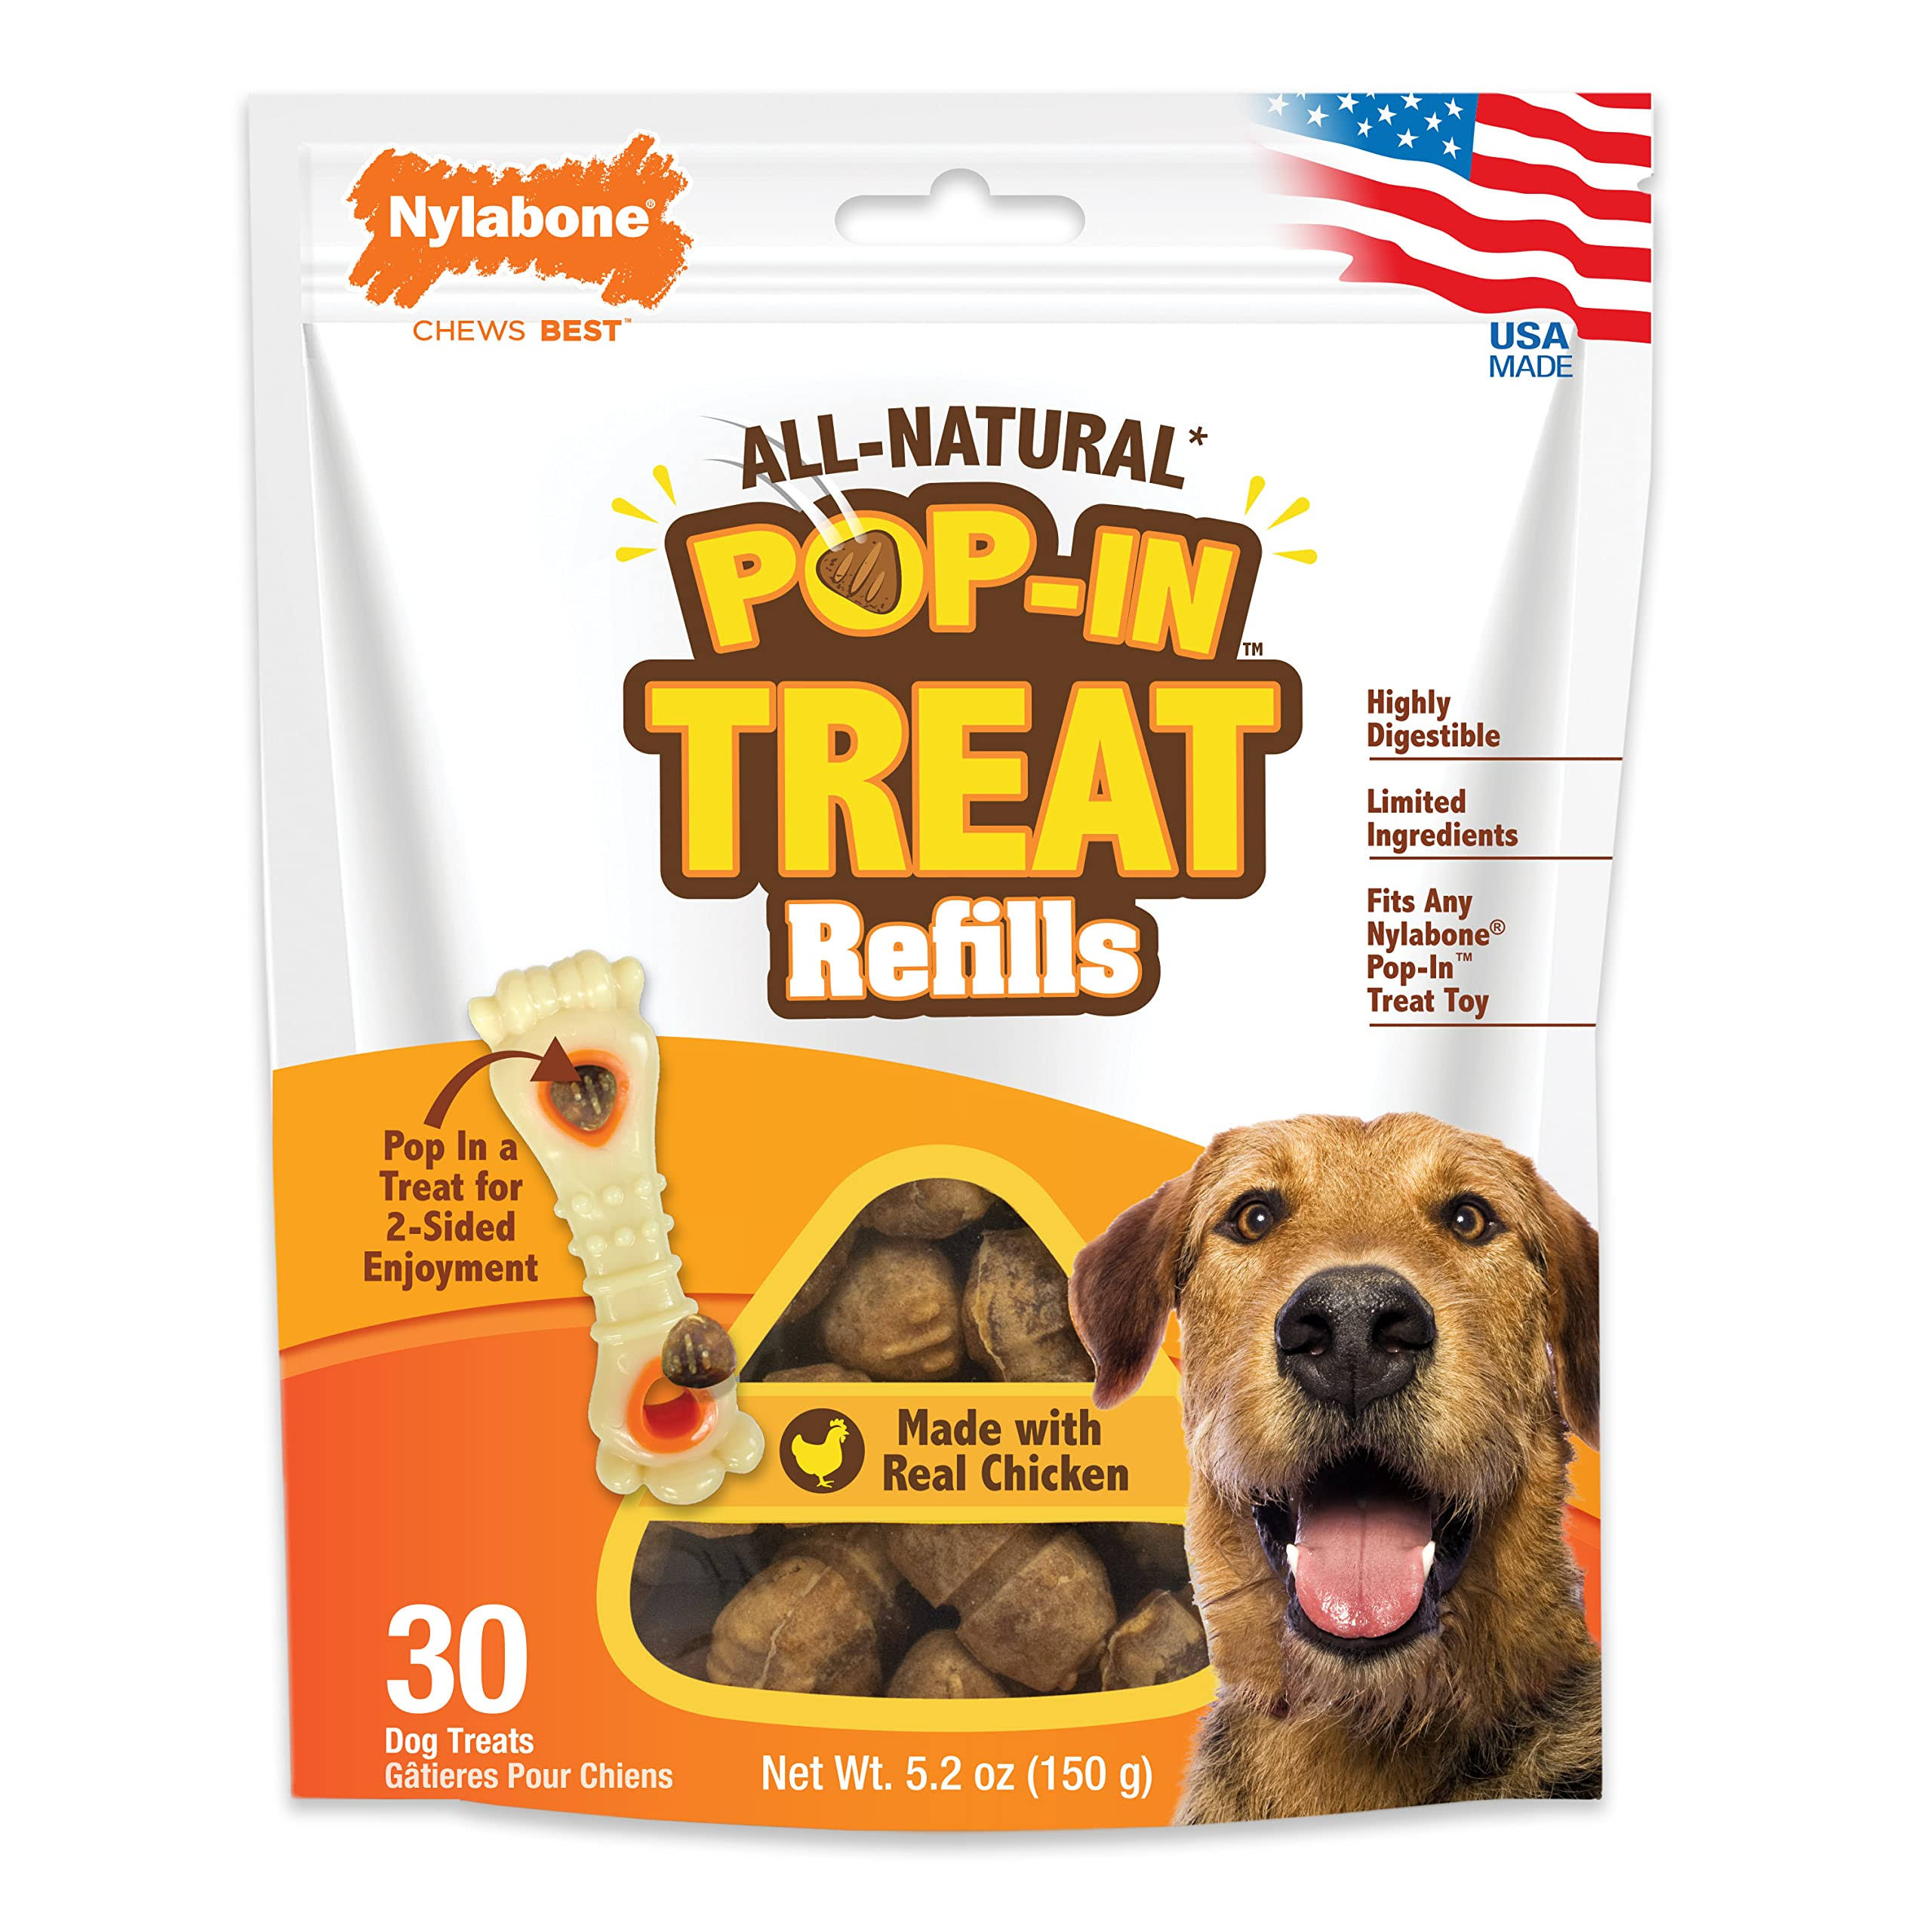 Nylabone Pop-in Dog Treat Refills For Treat Toy Combo 30 Count 30